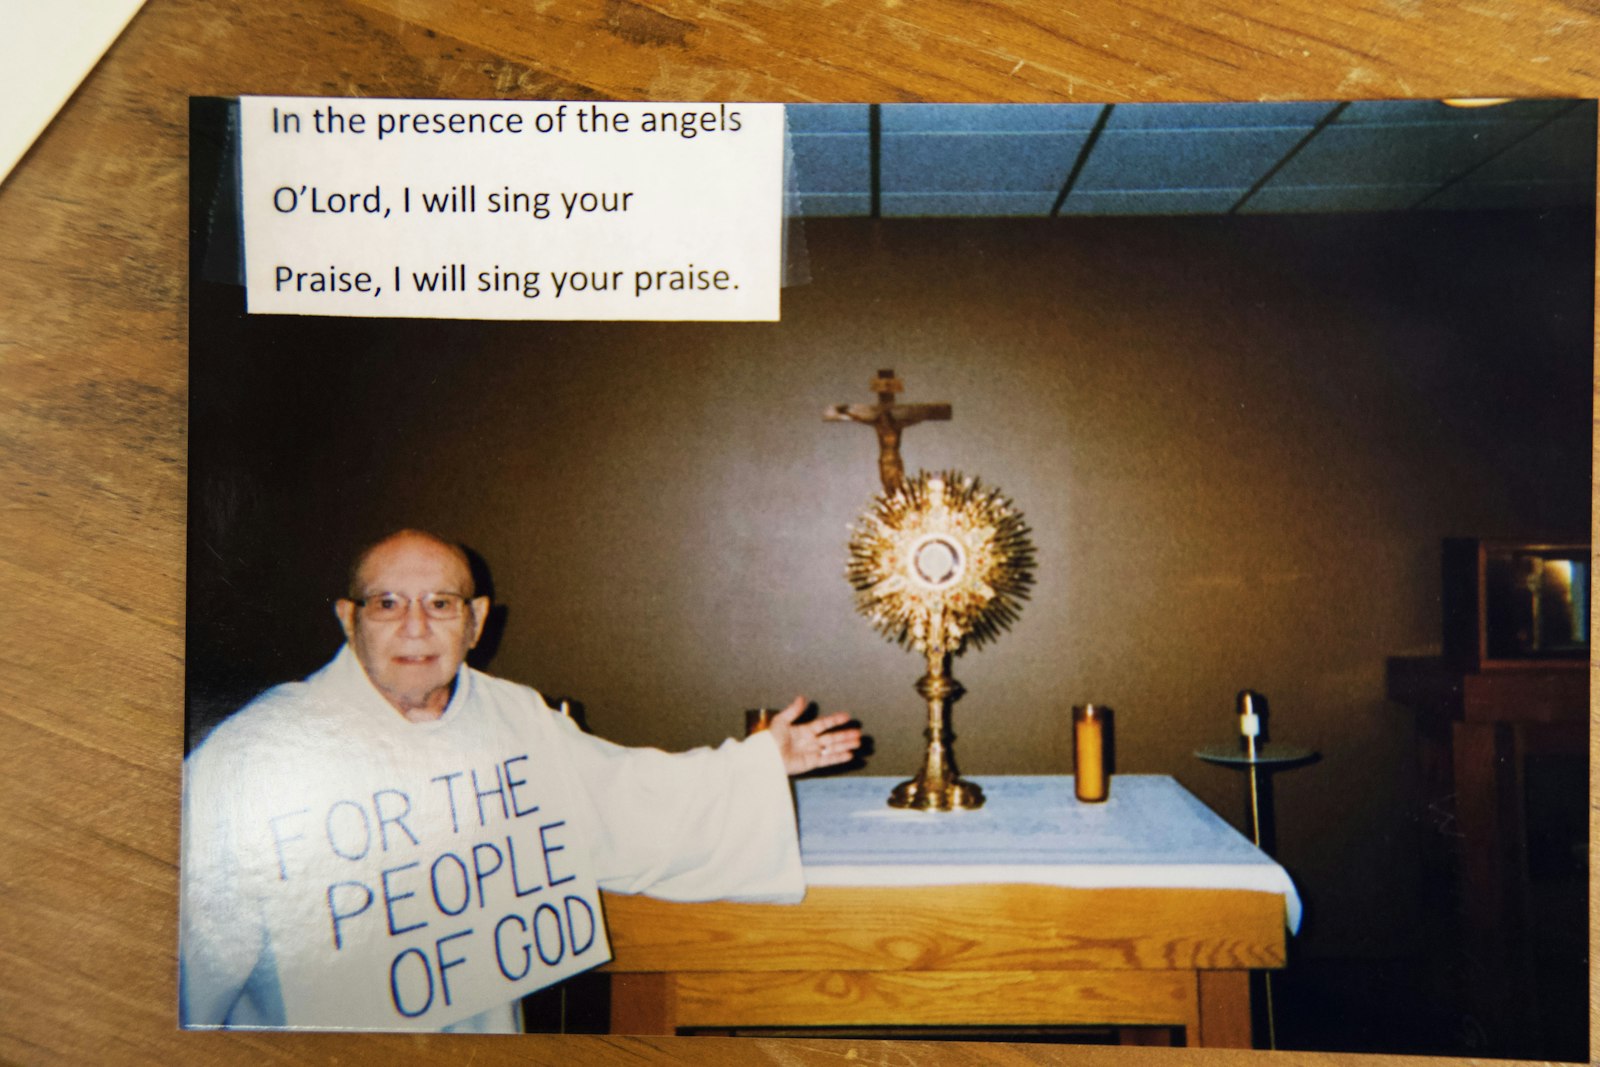 In a recent picture provided by Deacon Delbeke, he stands in front of the altar at St. Edith Parish in Livonia during benediction holding a sign that says, “For the People of God.” It's his way of reminding parishioners that everything God does, especially through the Blessed Sacrament, is for them, he said.